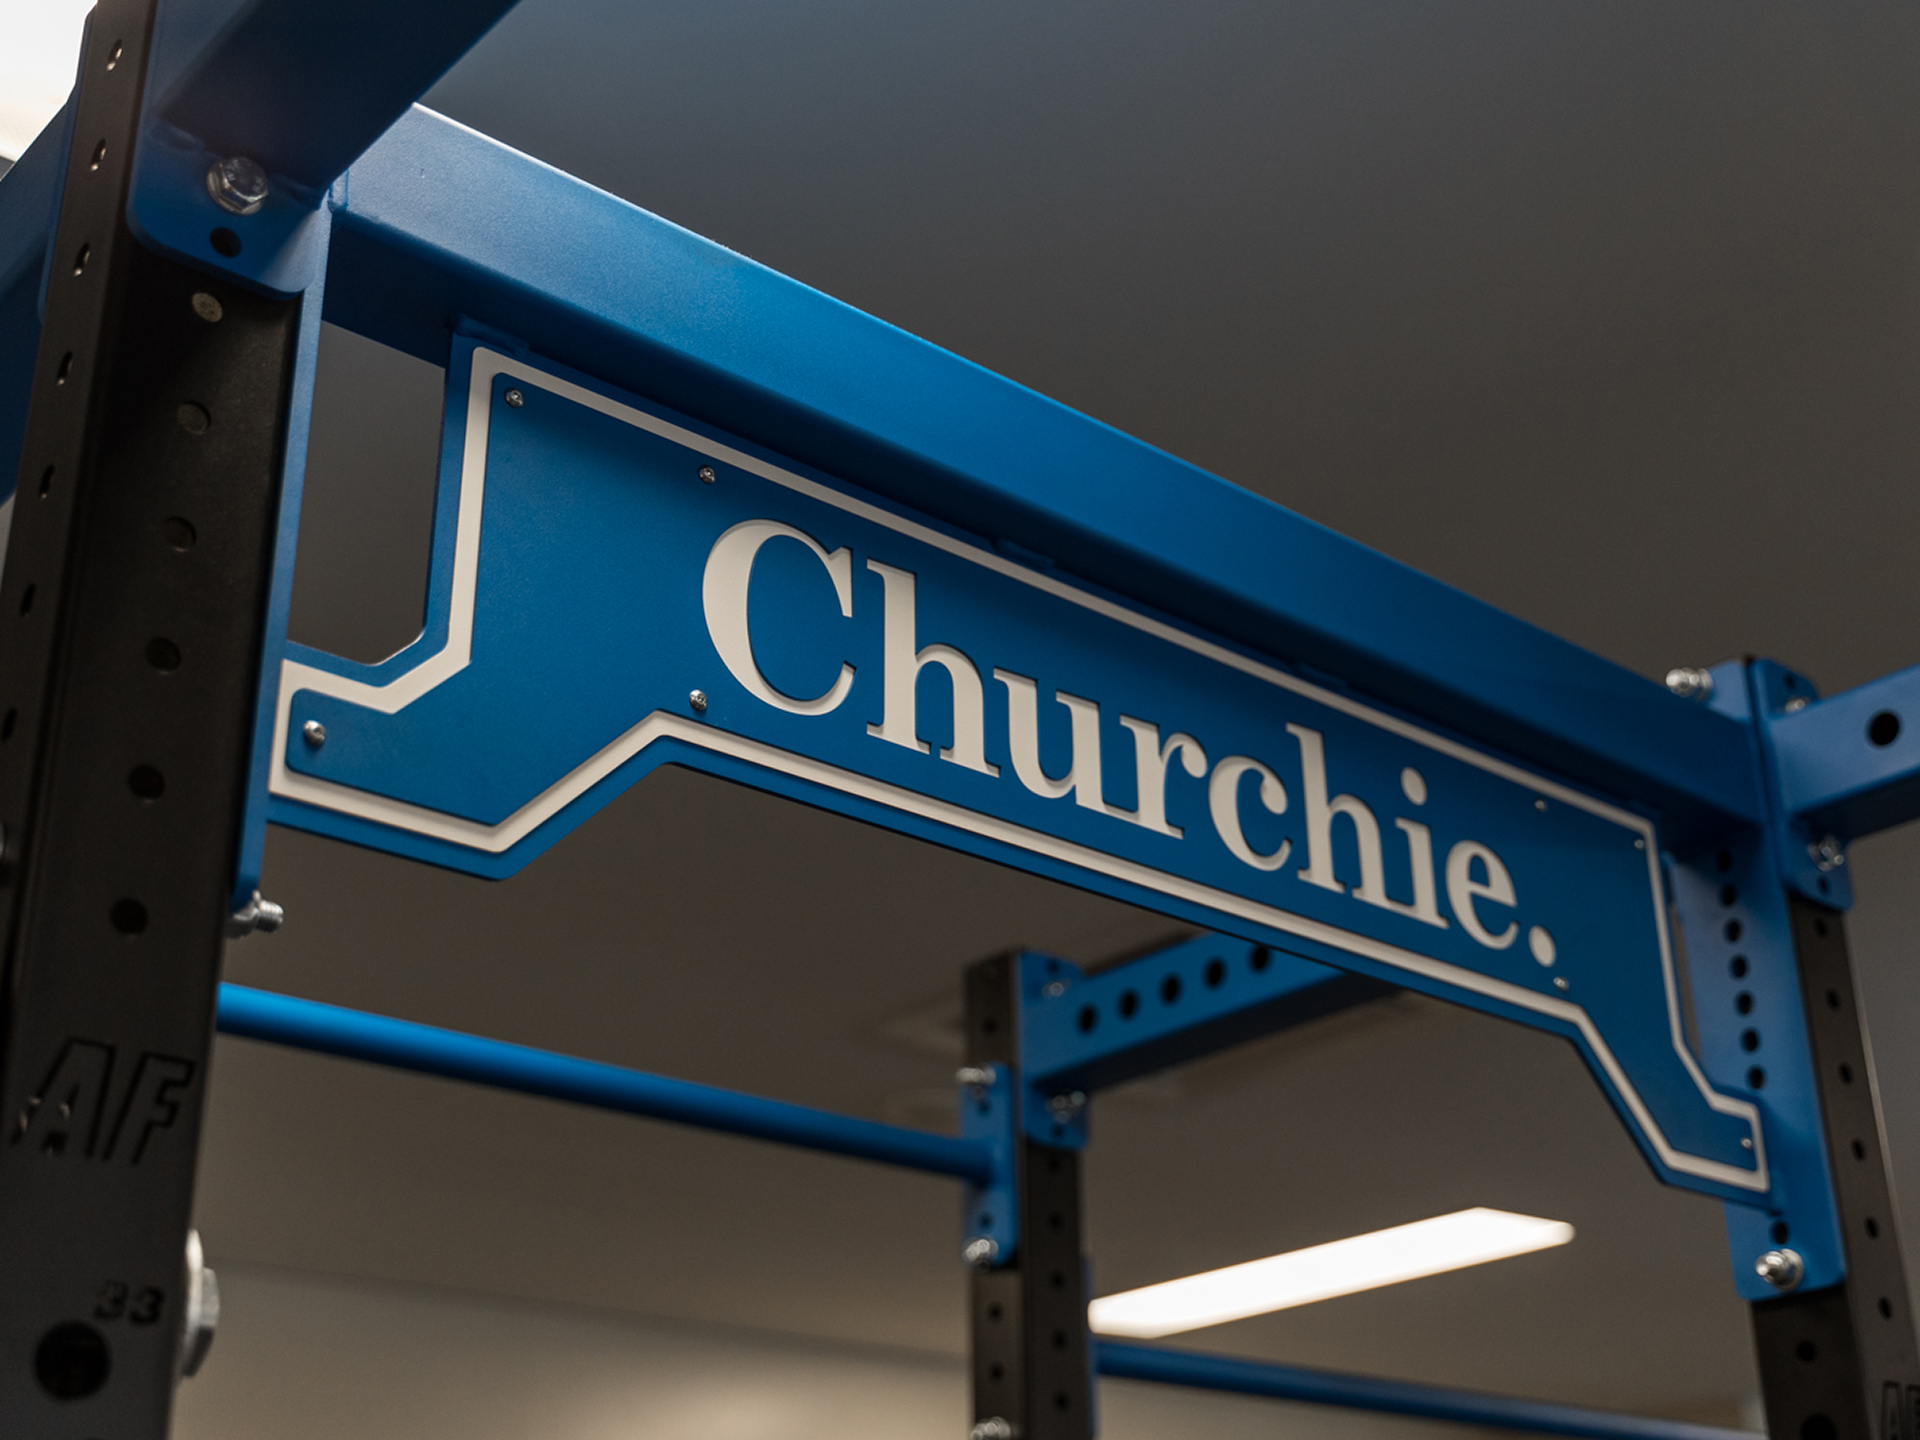 Churchie Independent School Gym Fitout